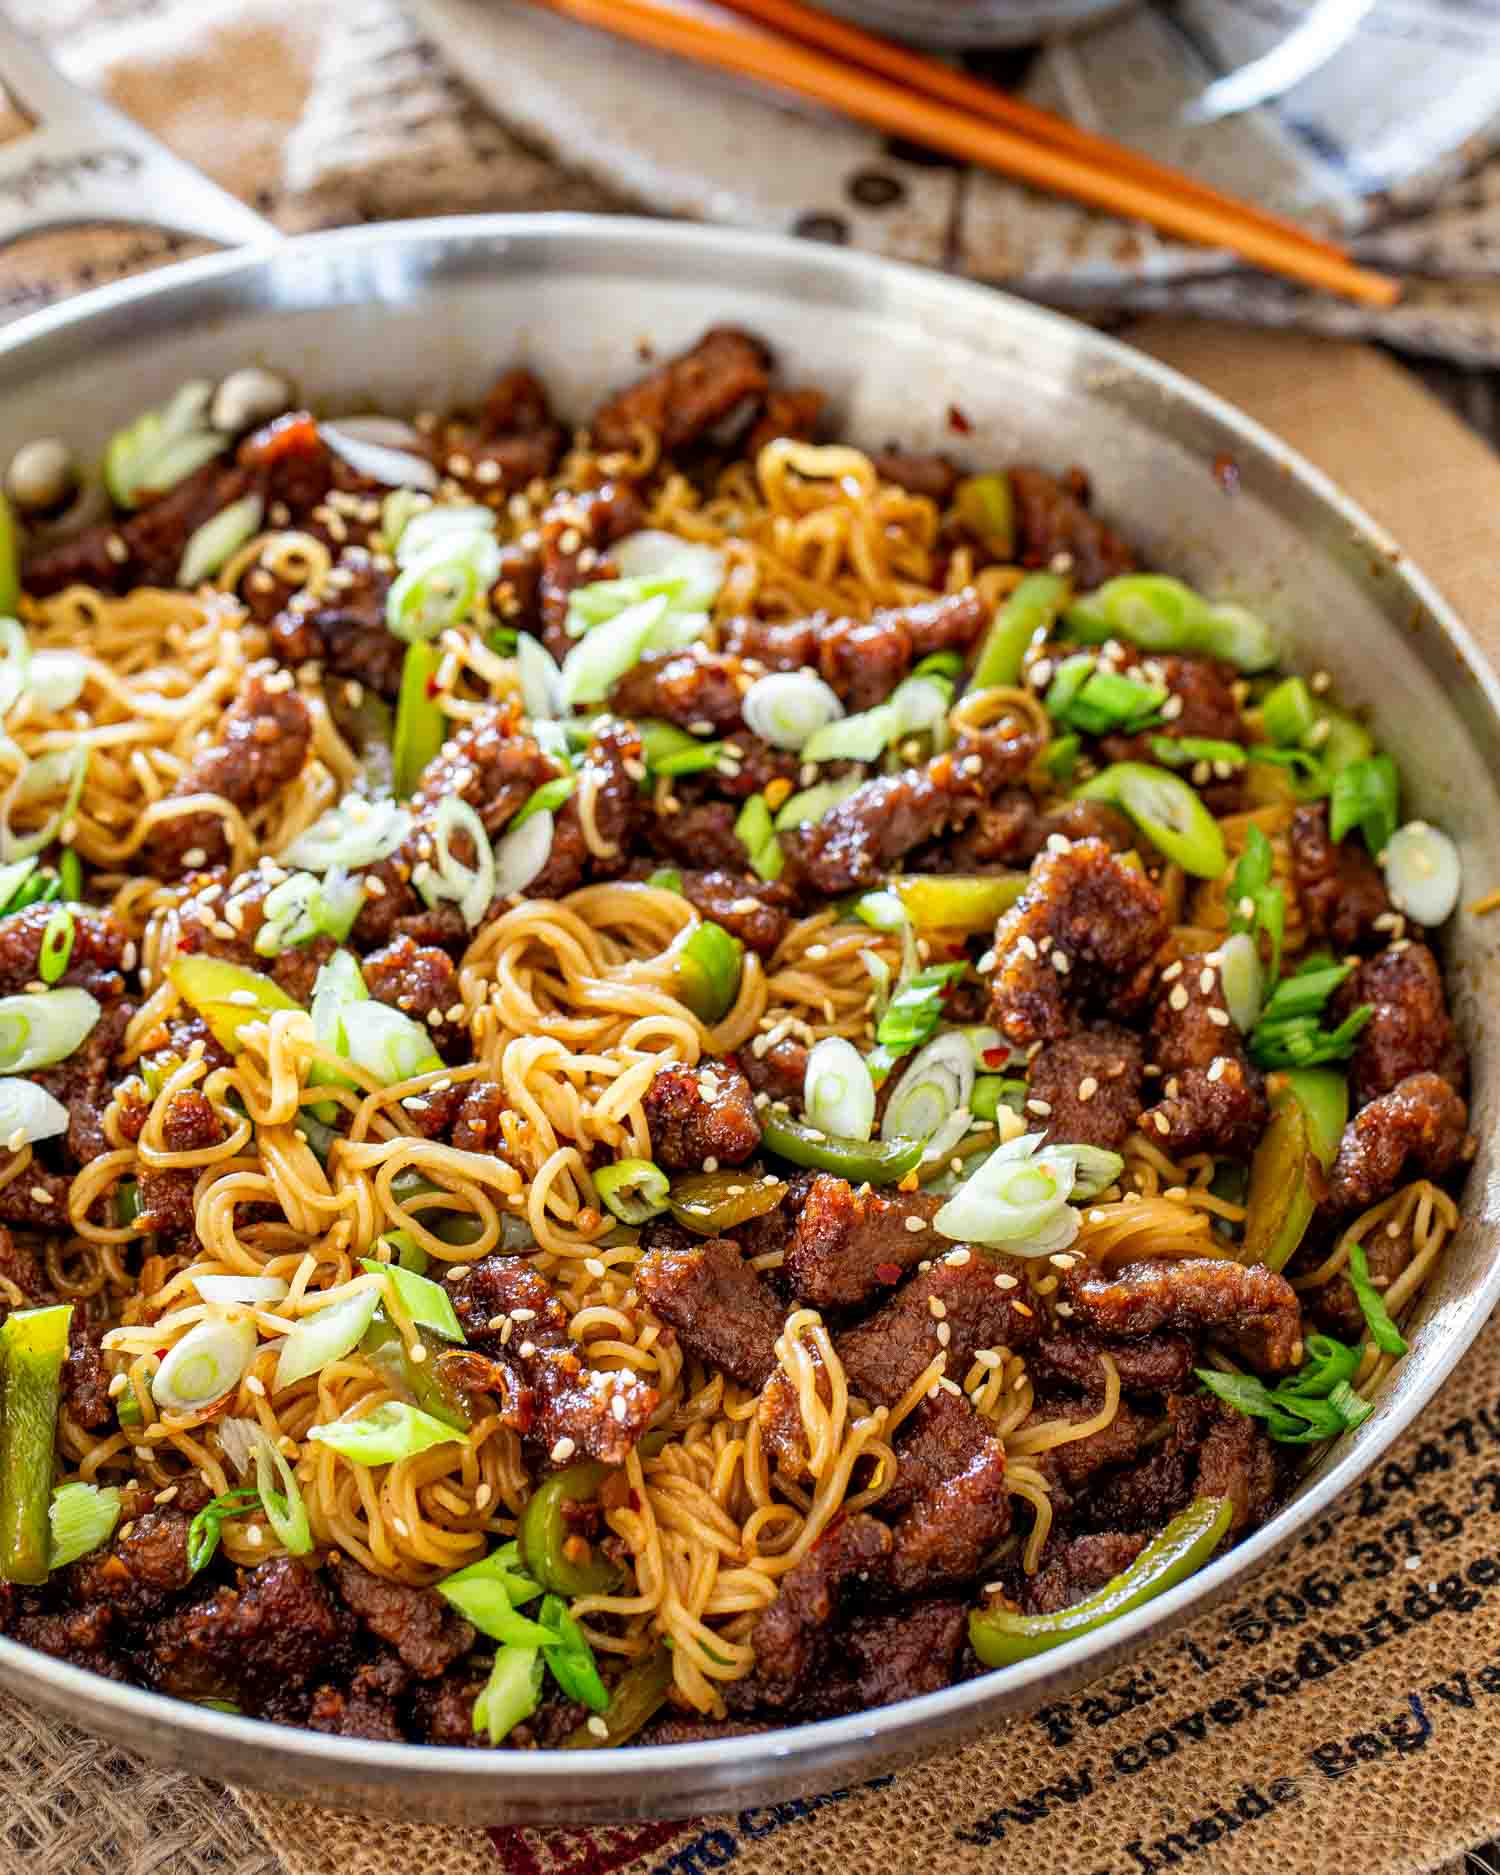 freshly made mongolian beef noodles in a skillet garnished with green onions.